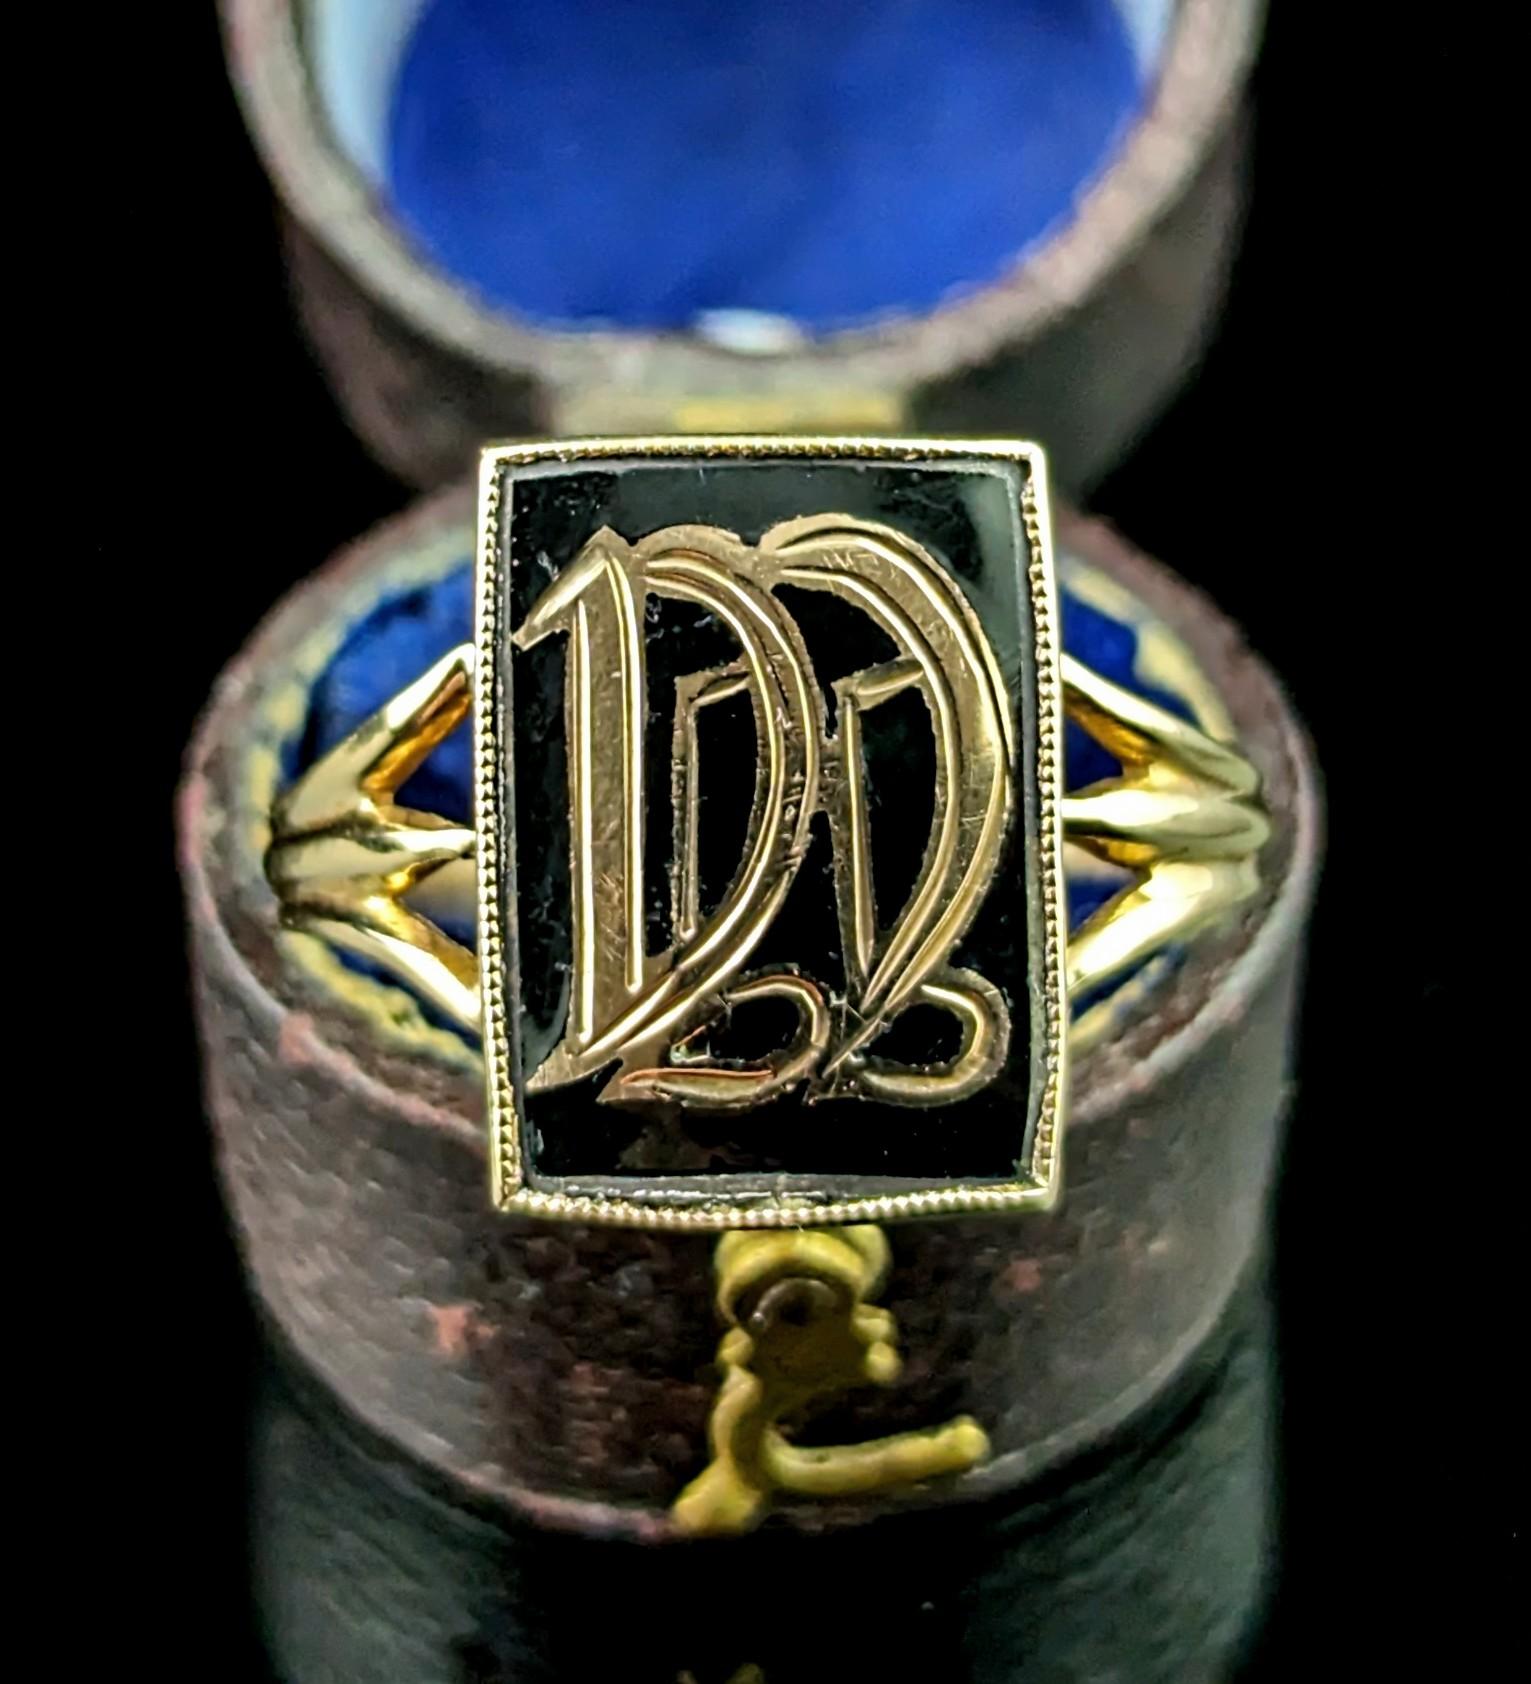 A gorgeous antique, late Victorian era mourning ring.

This is an initial style signet ring with an applied gold monogram of the initials DD, set on a rich black enamel panel and set into a gold millegrain edge bezel frame.

The ring has decorative